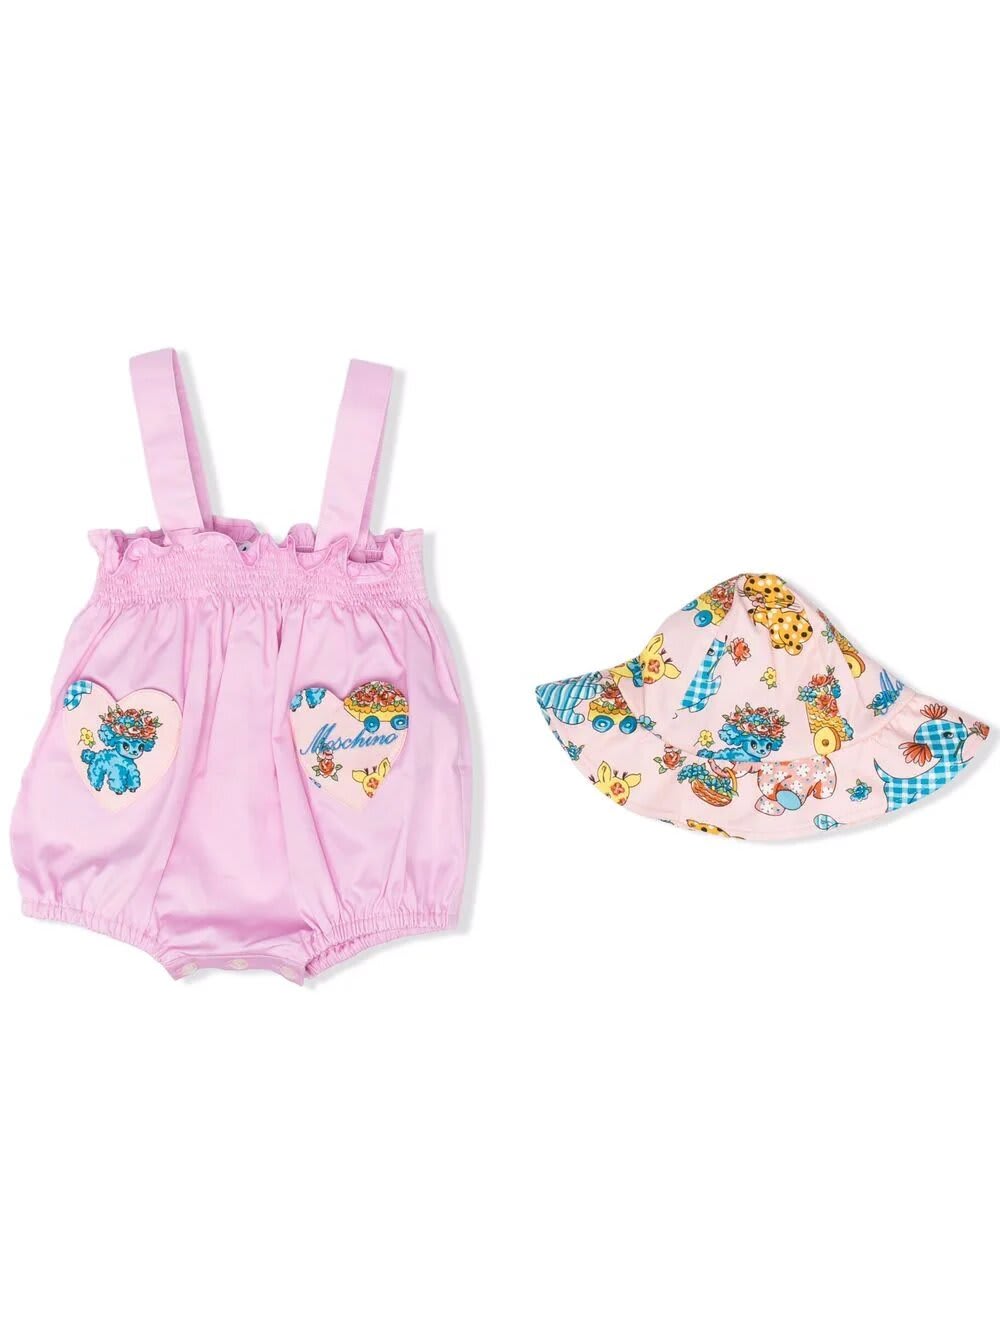 Moschino Baby Set With Pink Shorts With Suspenders And Hat With Calico Animals Print